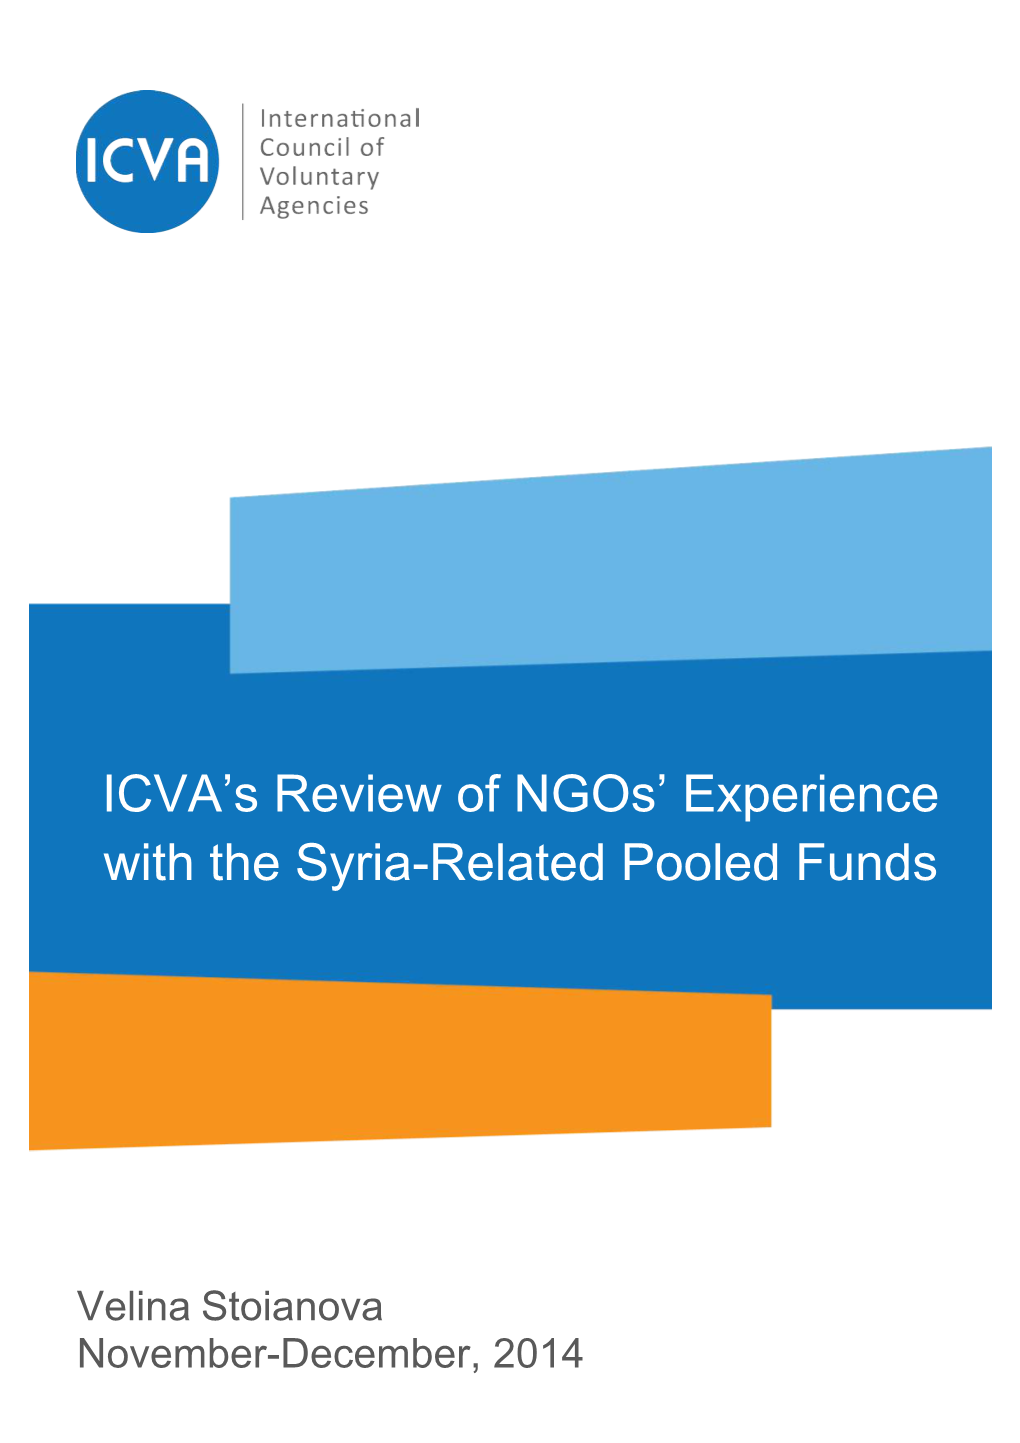 ICVA's Review of Ngos' Experience with the Syria-Related Pooled Funds